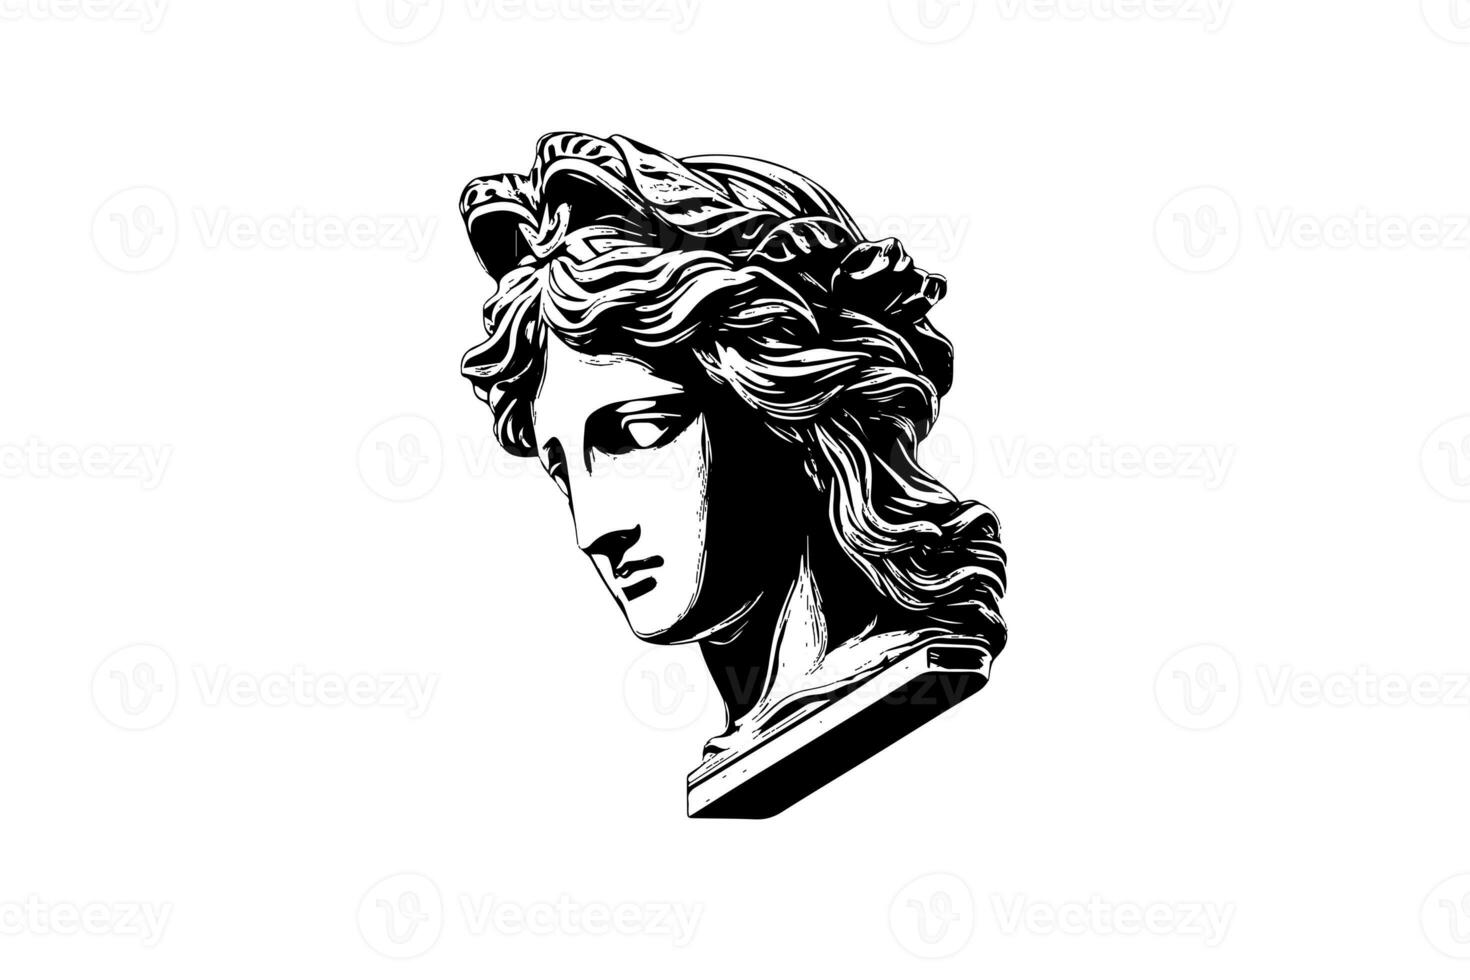 Antique statue head of greek sculpture sketch engraving style vector illustration. photo